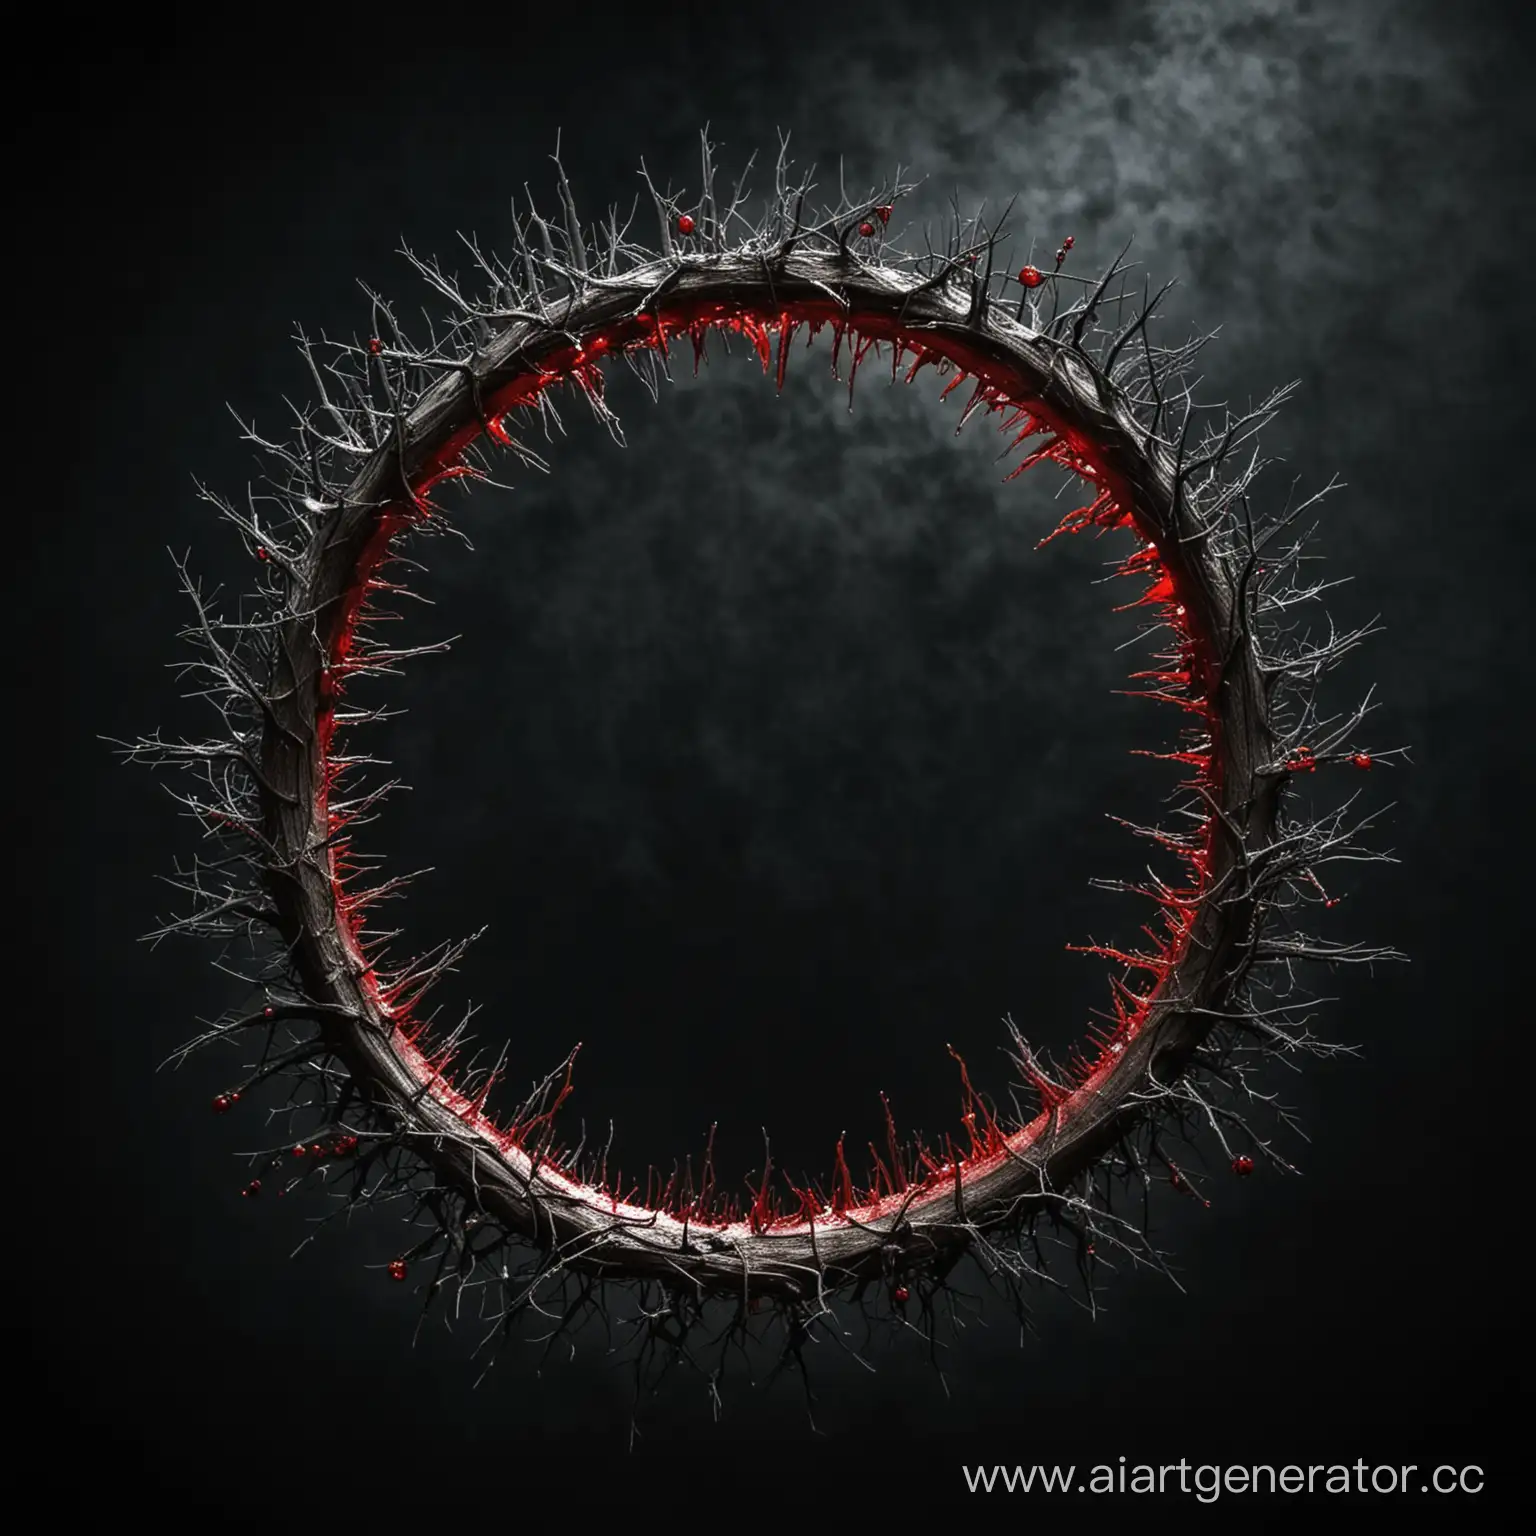 Dark-Halo-with-Thorny-Blood-Drips-on-Eerie-Black-Background